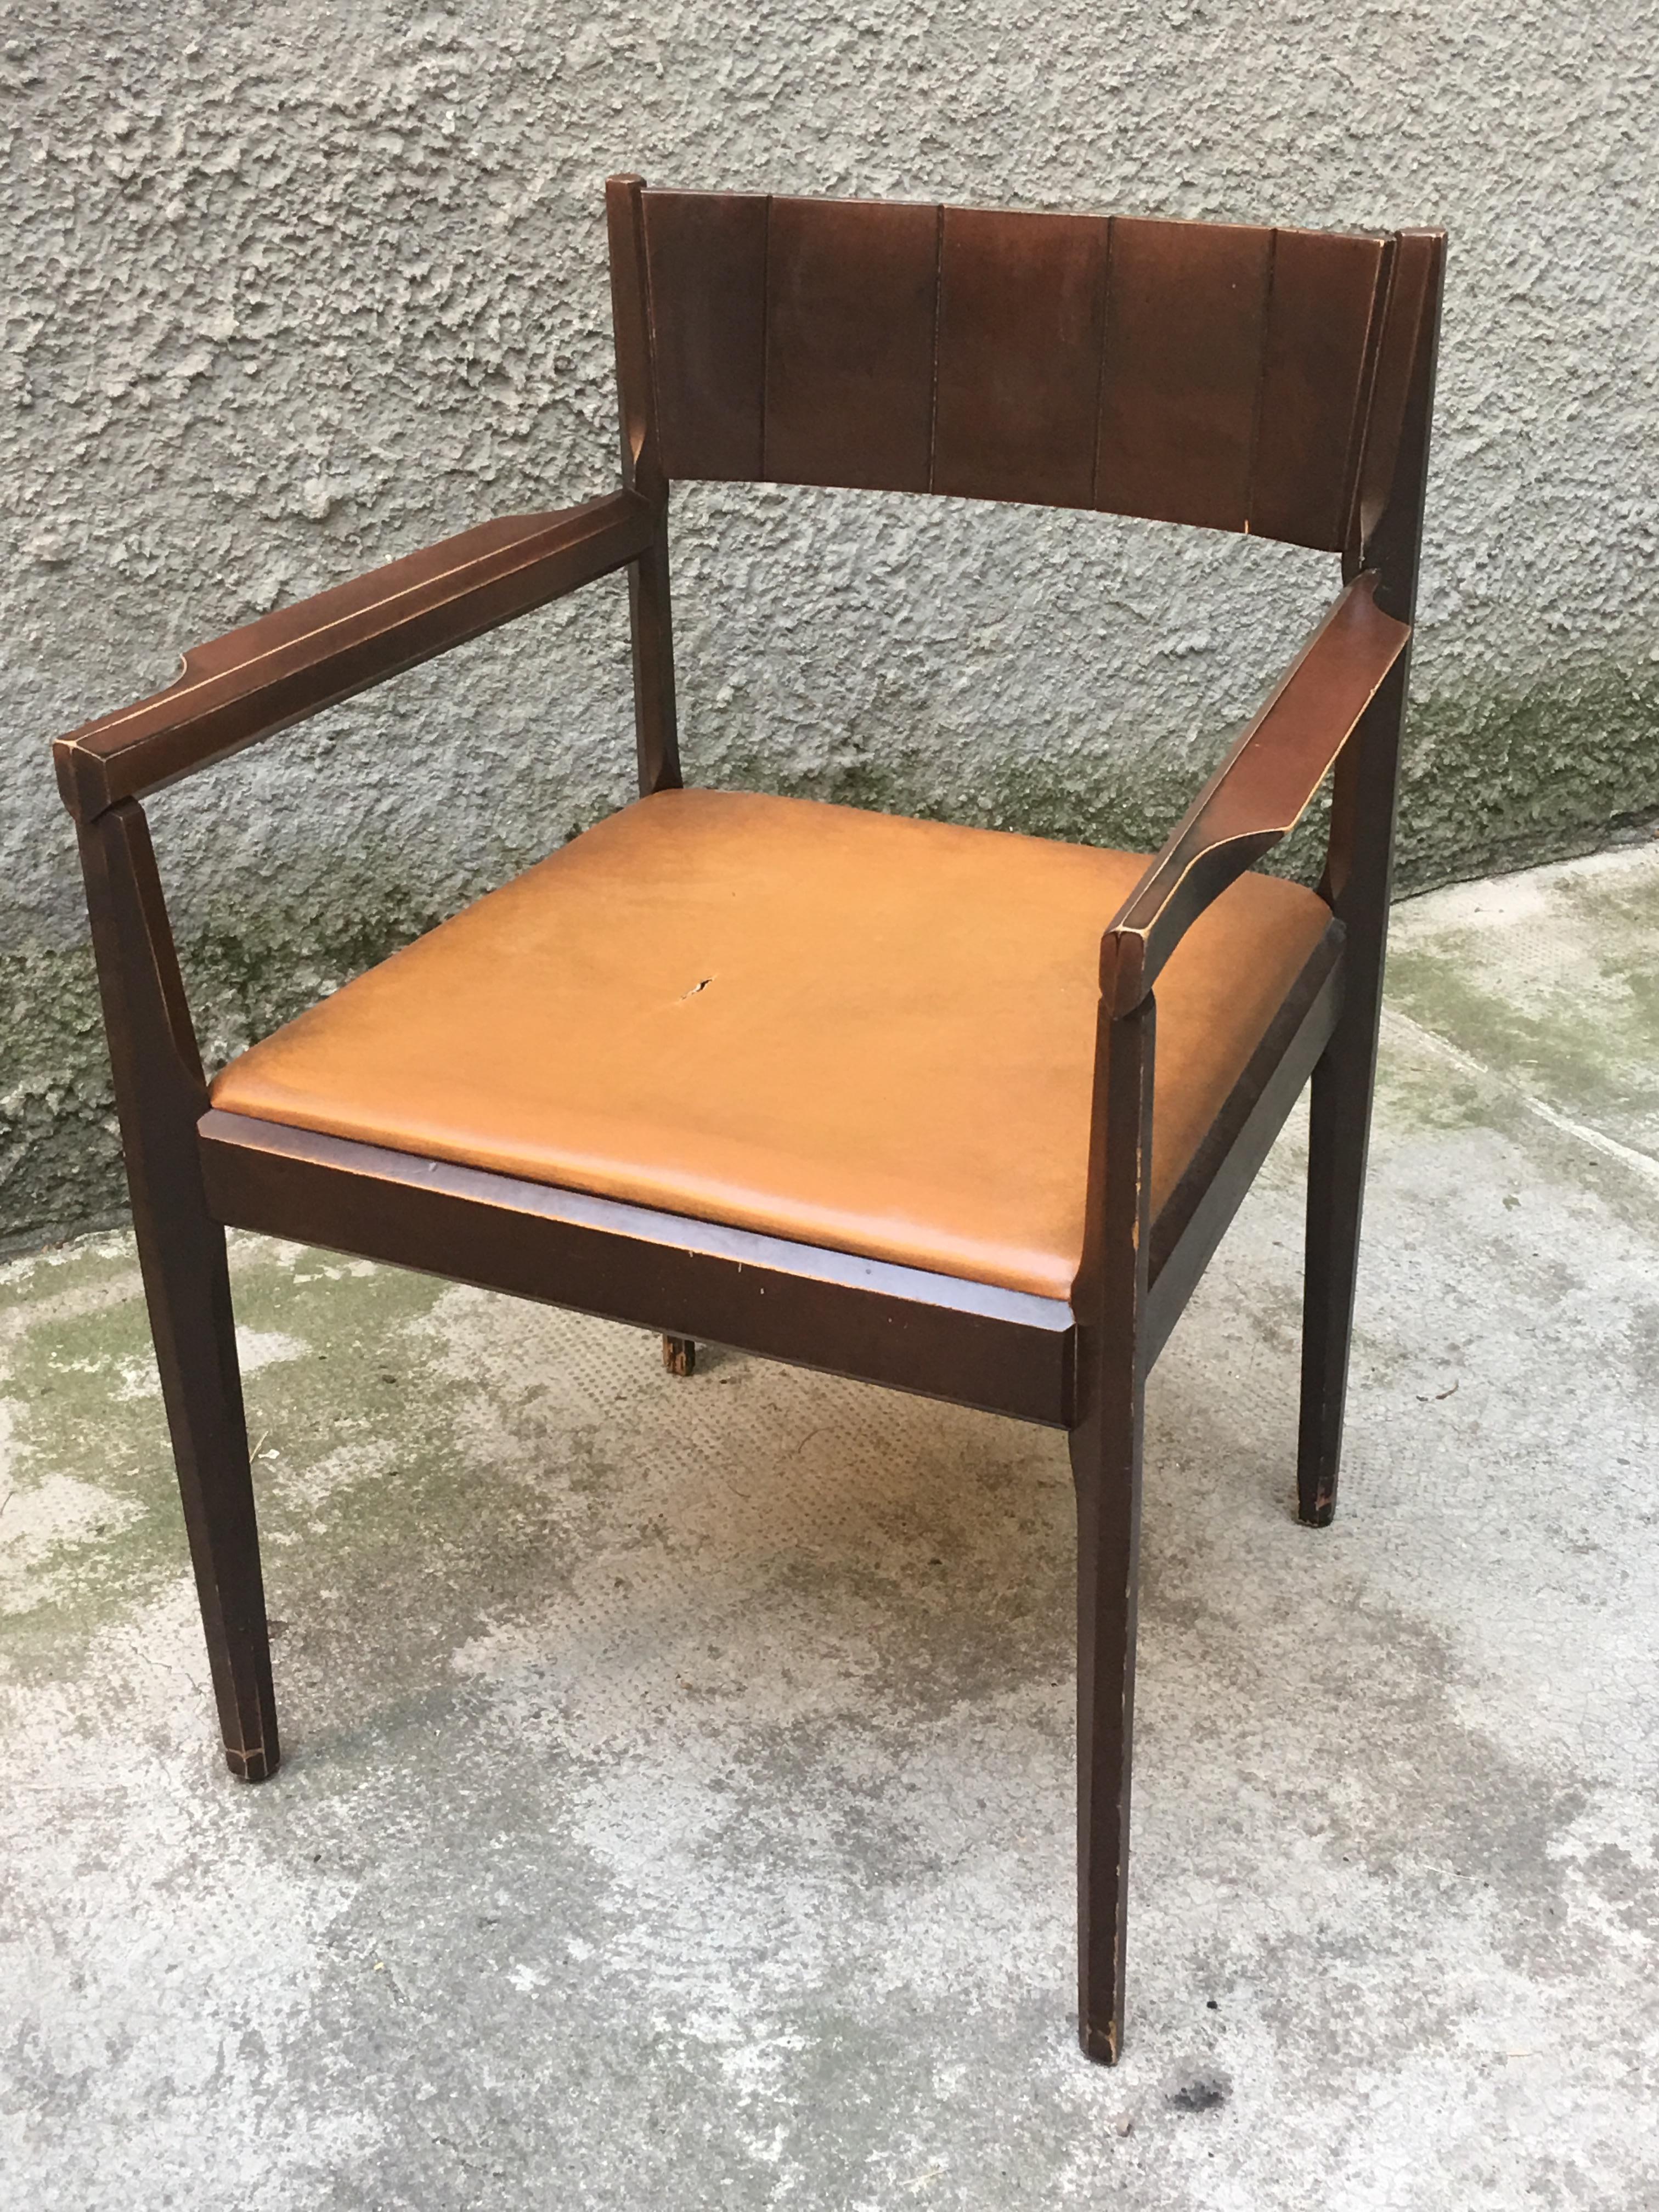 Small Italian Desk with Matching Chair - 60's - Vittorio Dassi -  Set of 2 For Sale 1